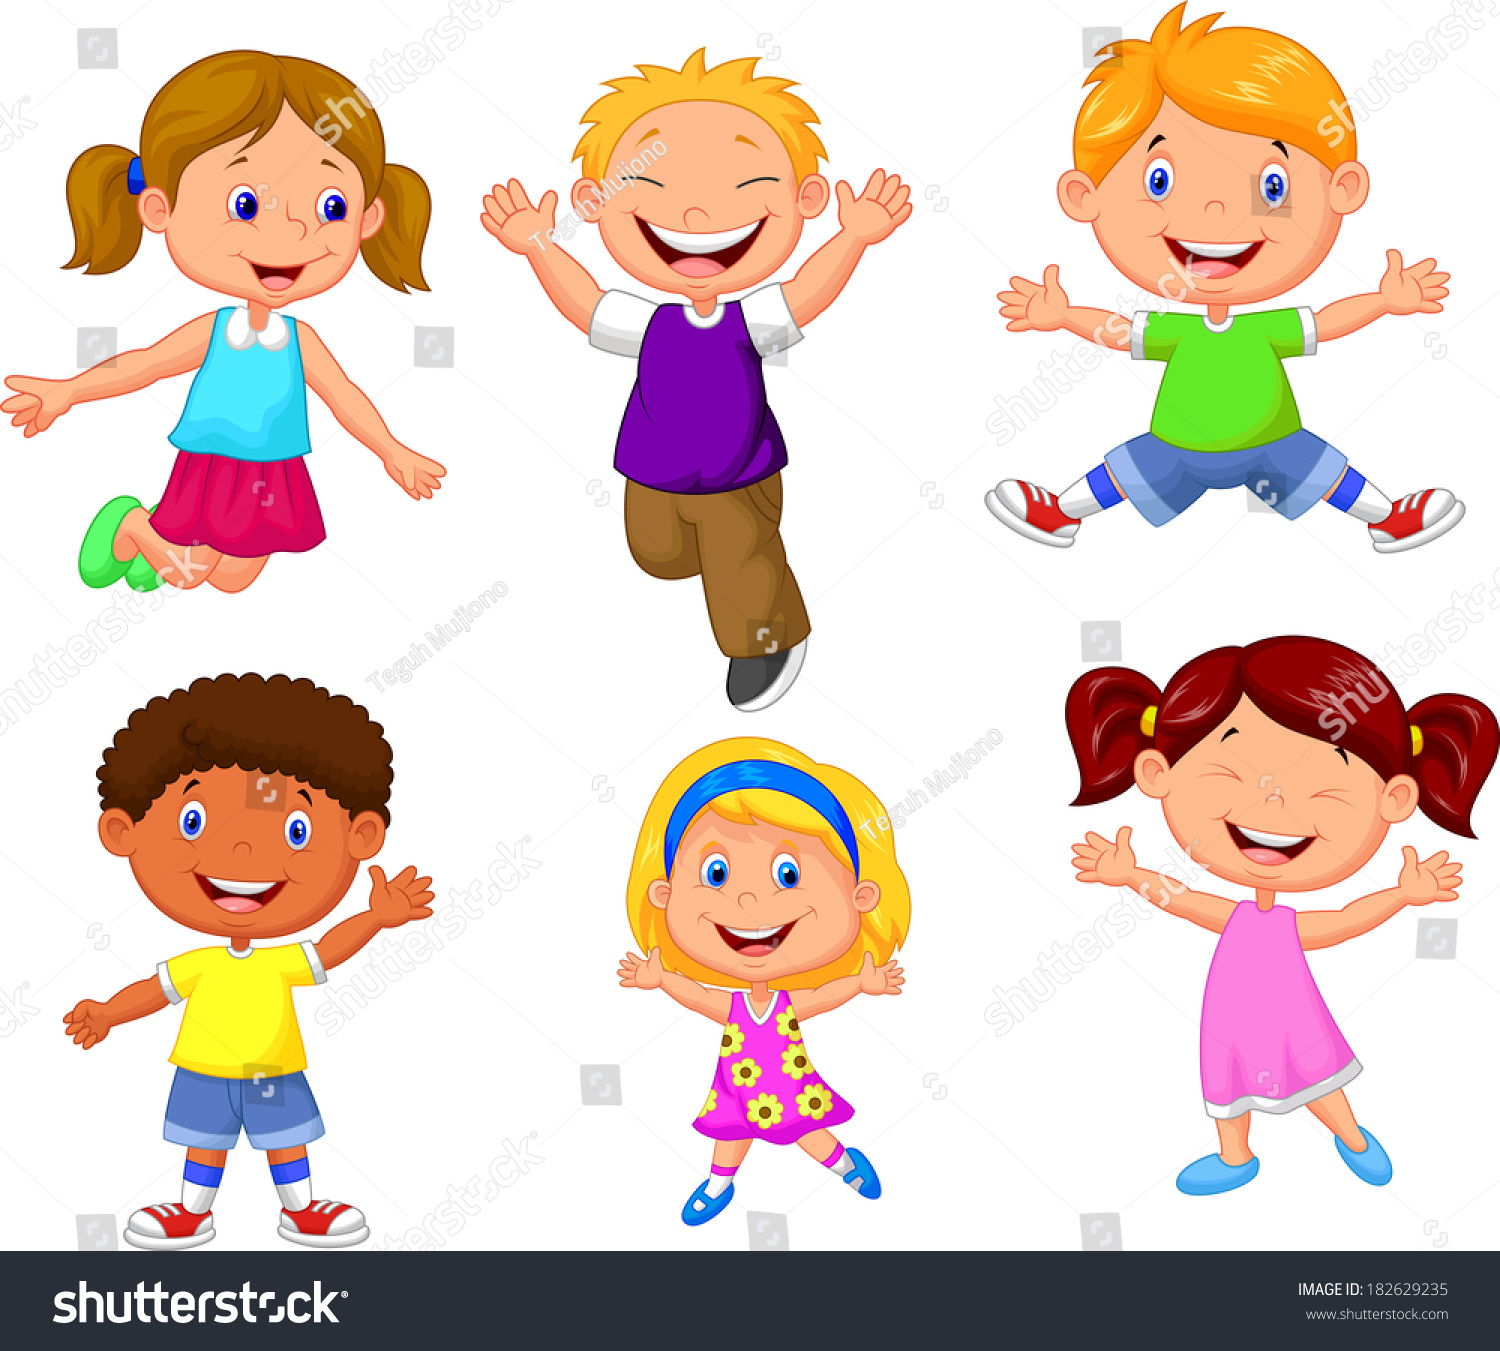 childrens clipart collection full download - photo #20